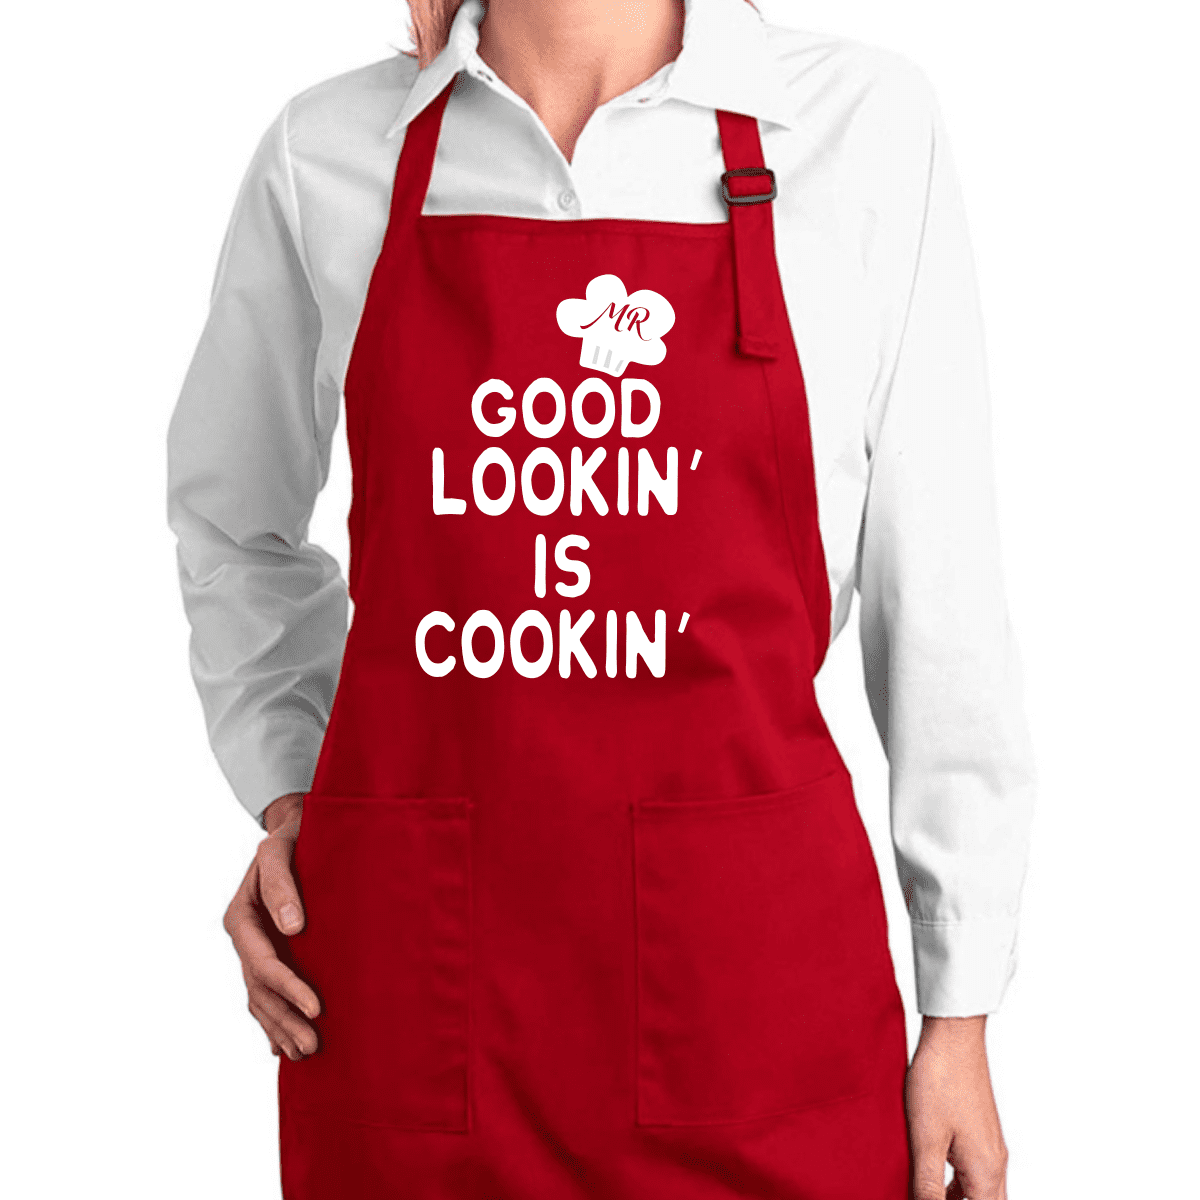 Good Lookin' Is Cookin' Funny Chef Kitchen Cooking Apron with Pockets 